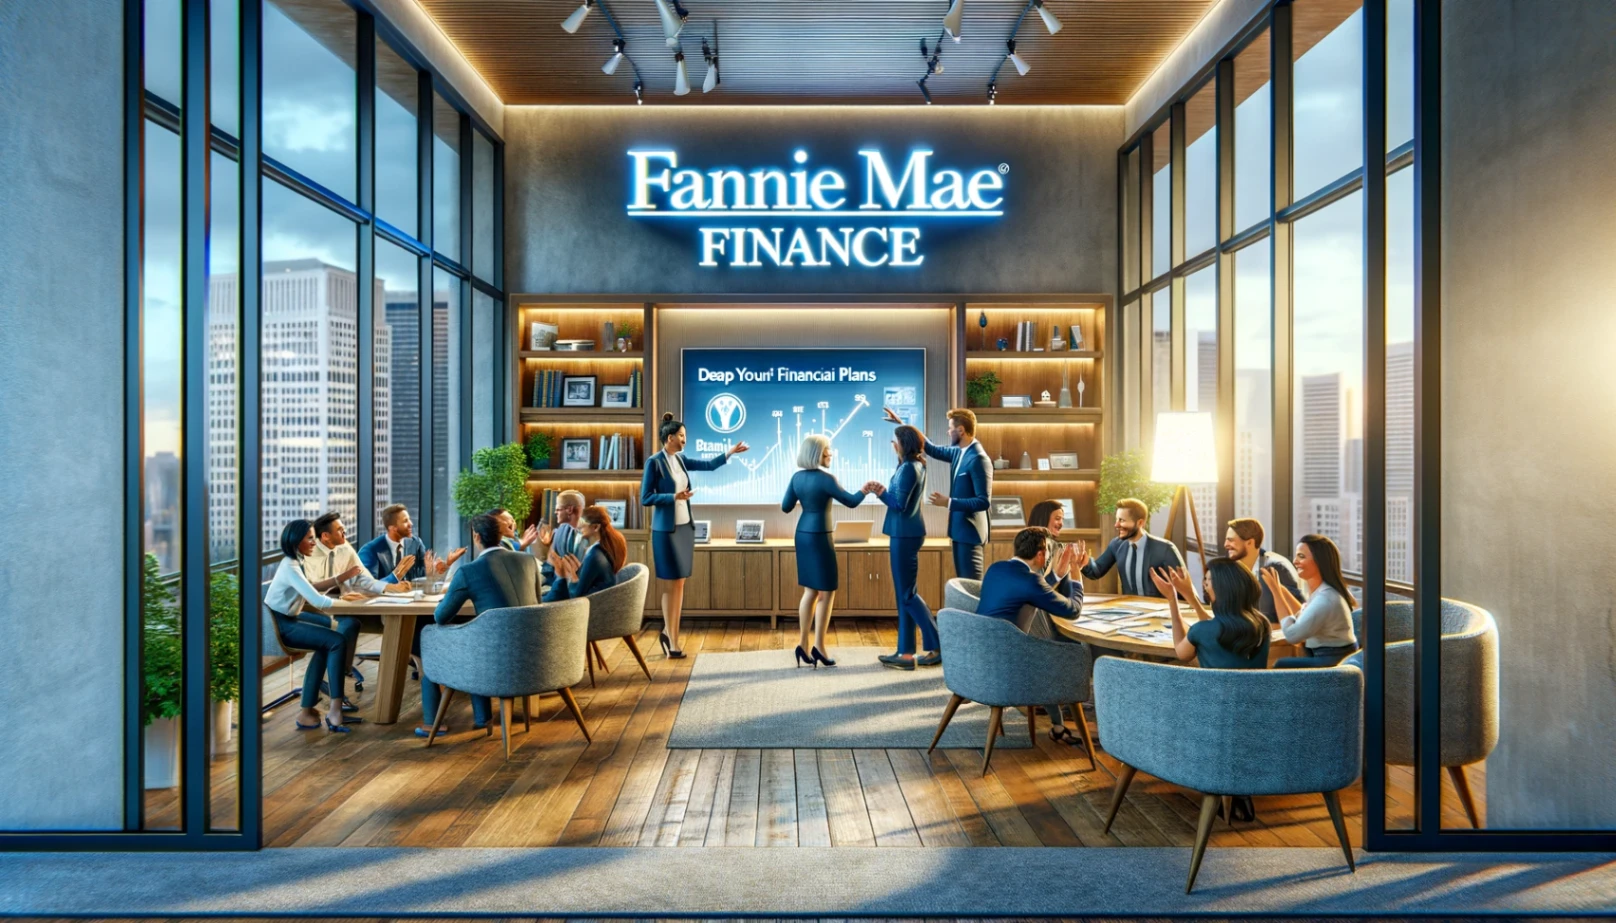 Working at Fannie Mae Finance: Learn How to Apply